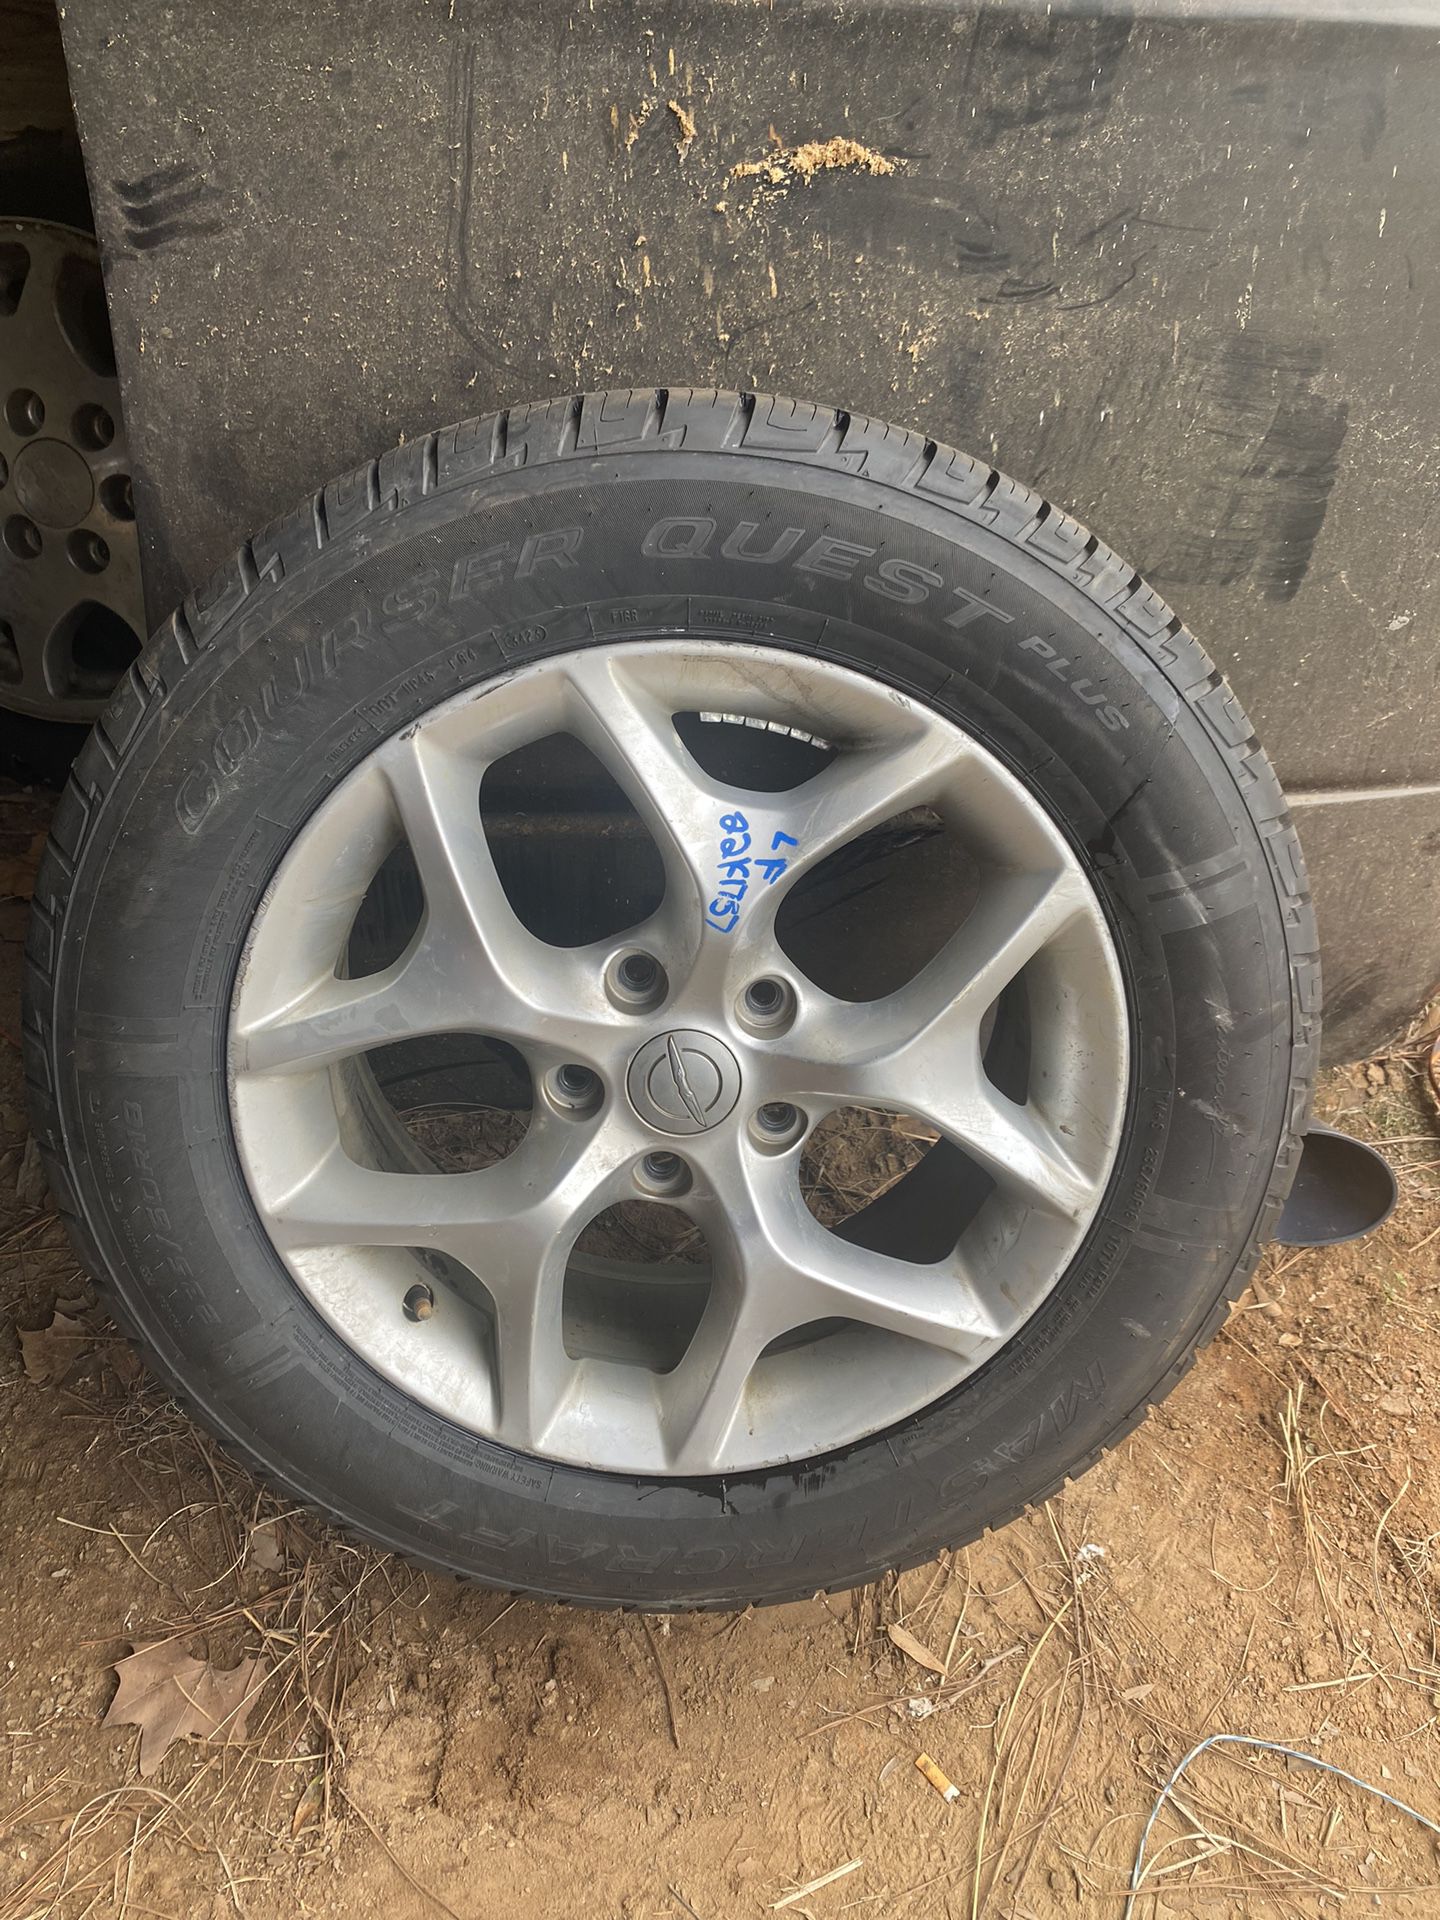 2017 Chrysler Rim And Brand New Top-Of-The-Line Tire 